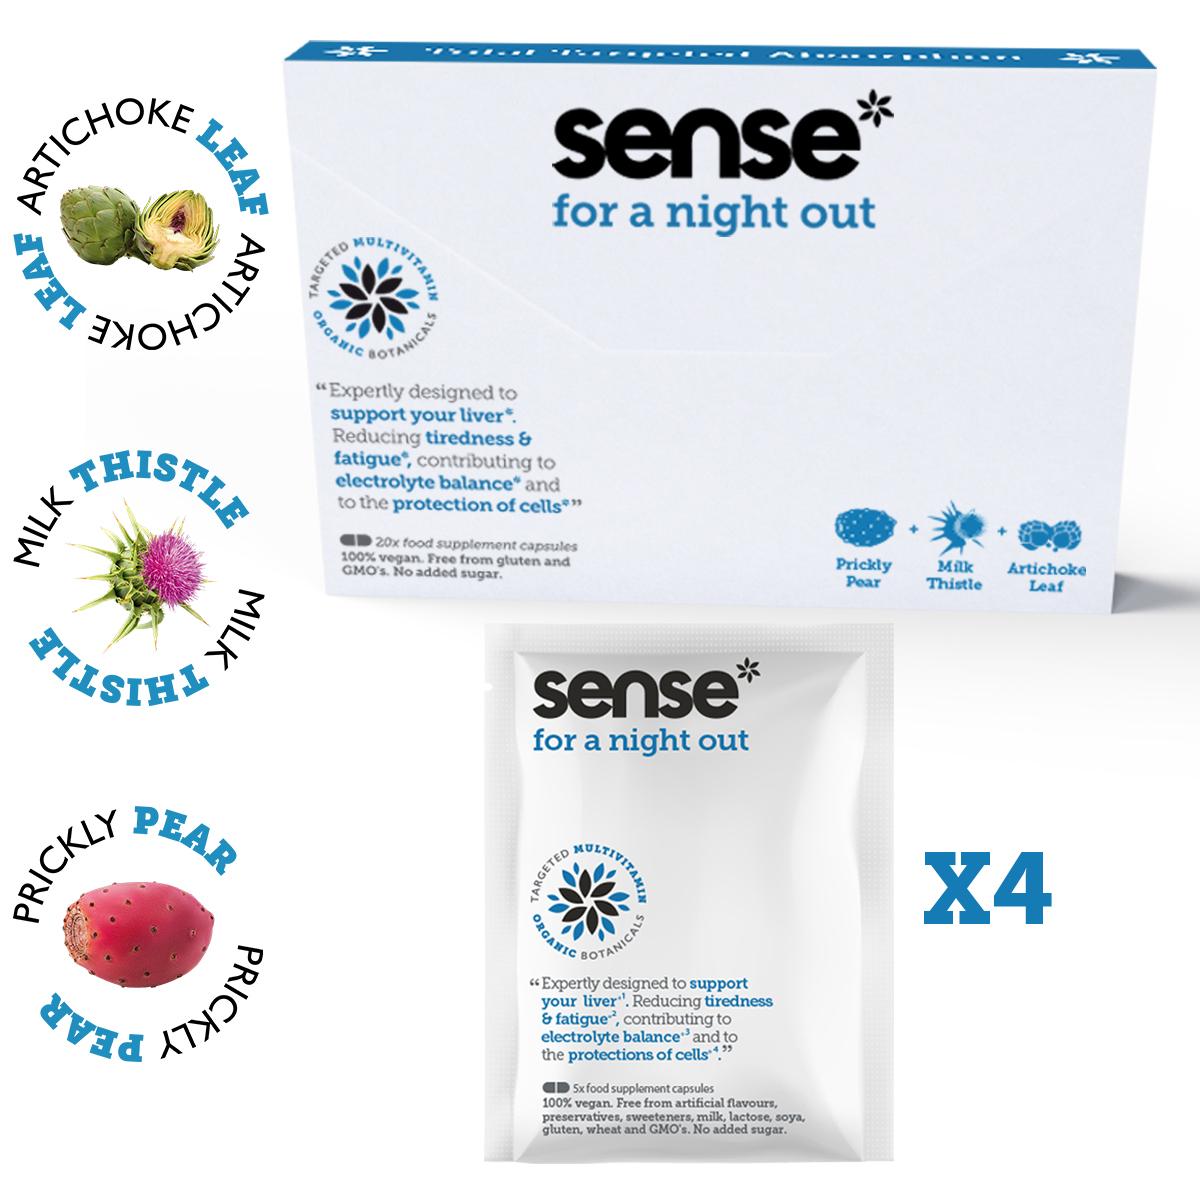 Product Buy sense* for a night out - food supplement capsules - 20 capsules image